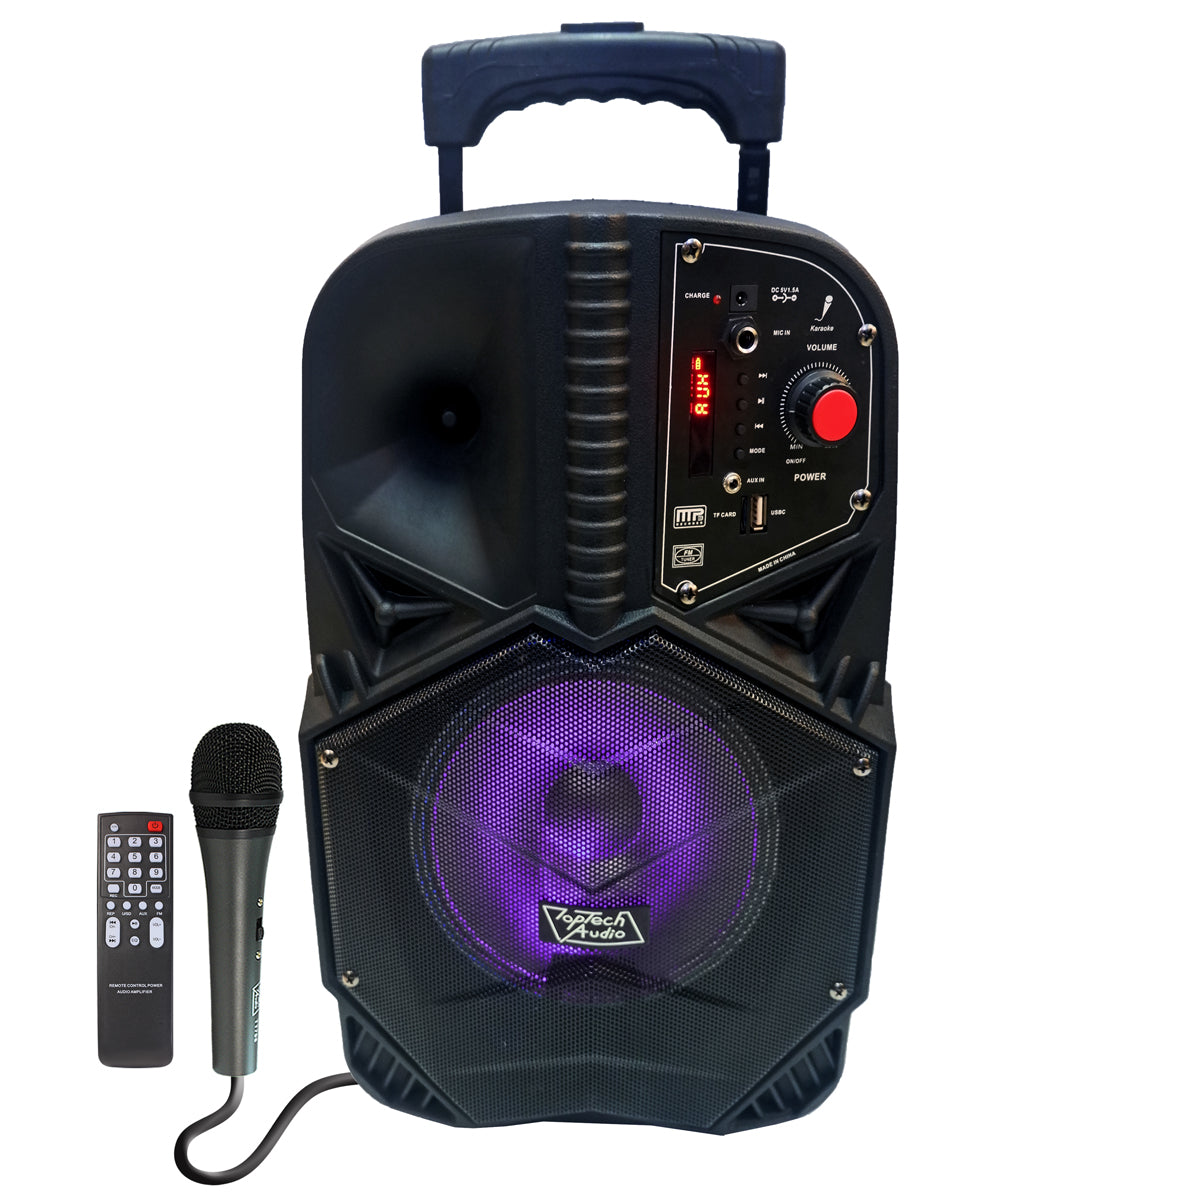 TOPTECH BLADE-8, 8-Inches Fully Amplified Speaker, Portable with Trolley Handle audio,1600 Watts Peak Power Sound Speaker with LED Light & Microphone